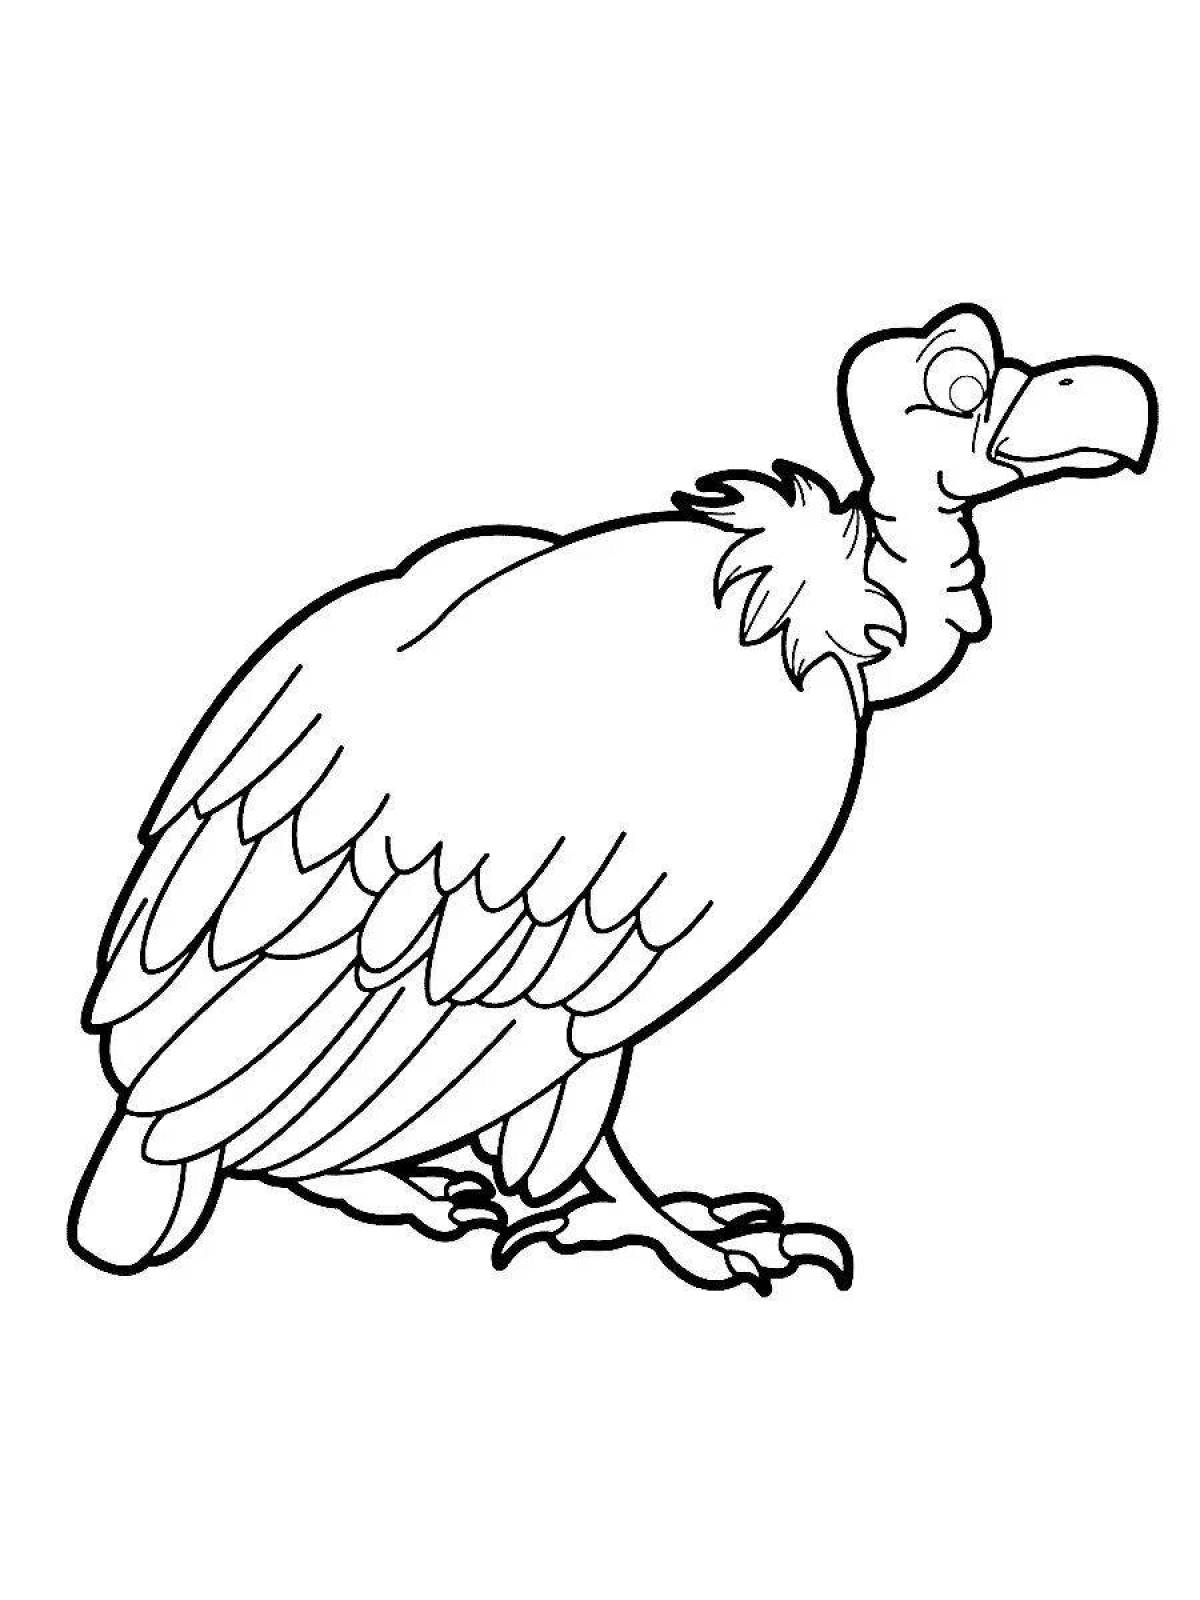 Awesome vulture coloring page